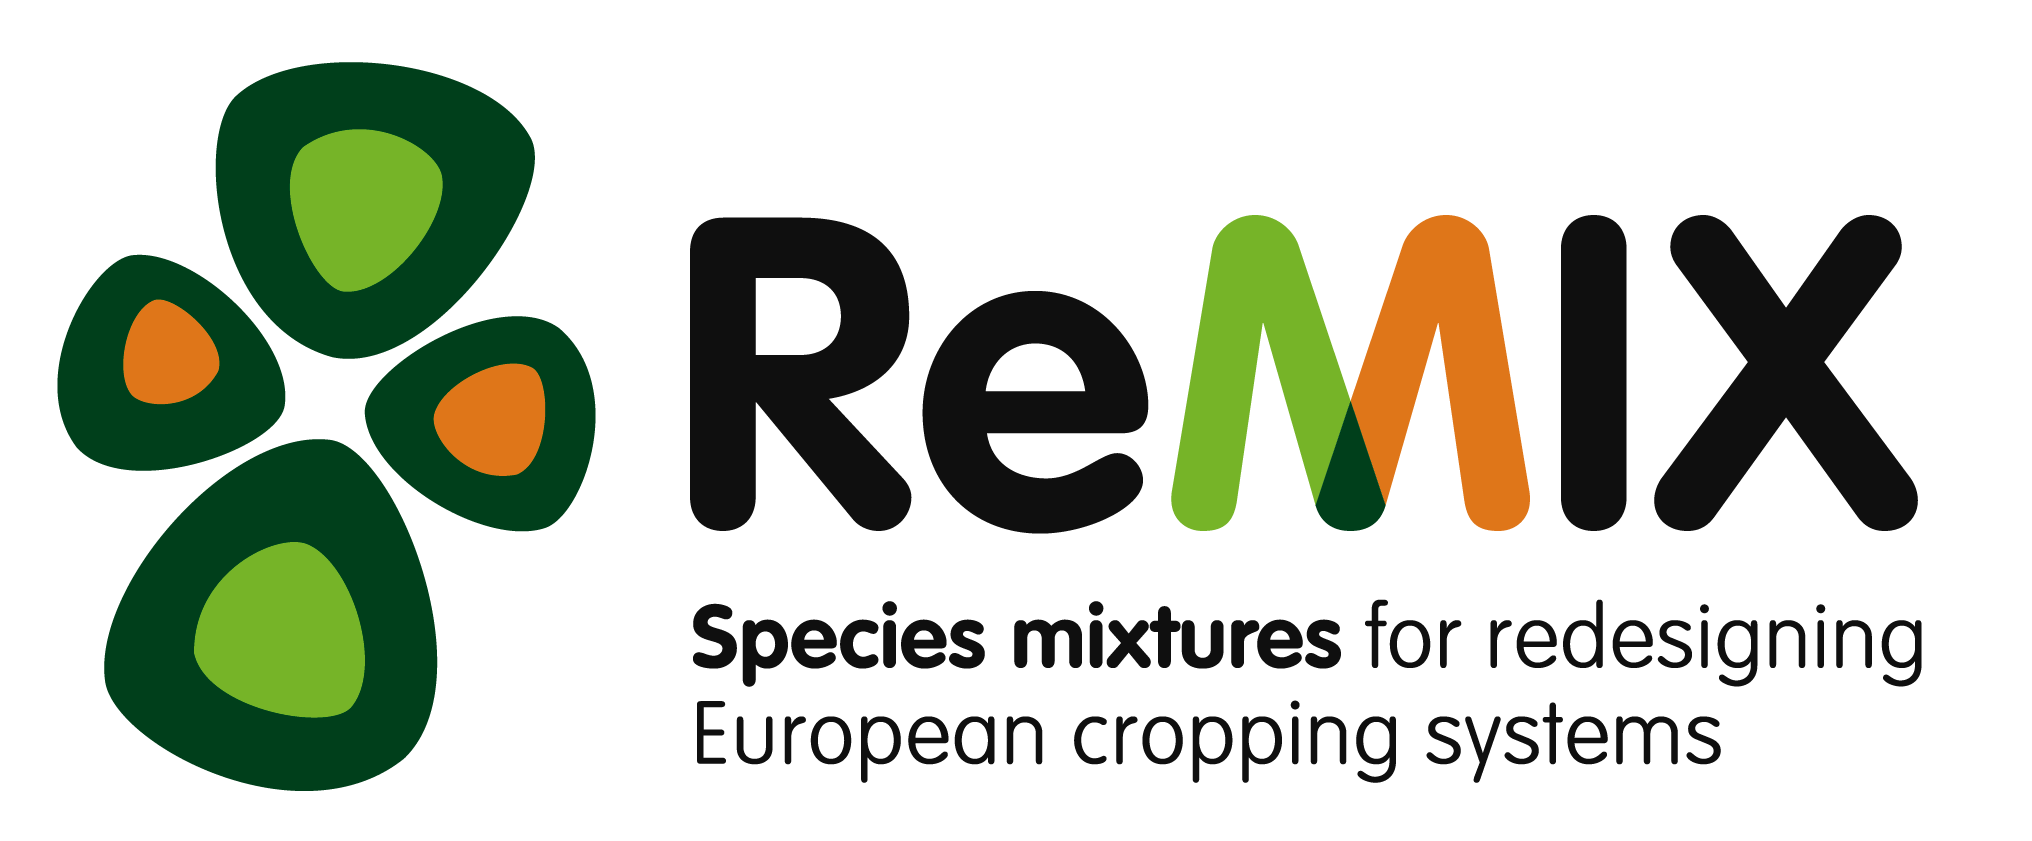 knowledge for organic remix project logo